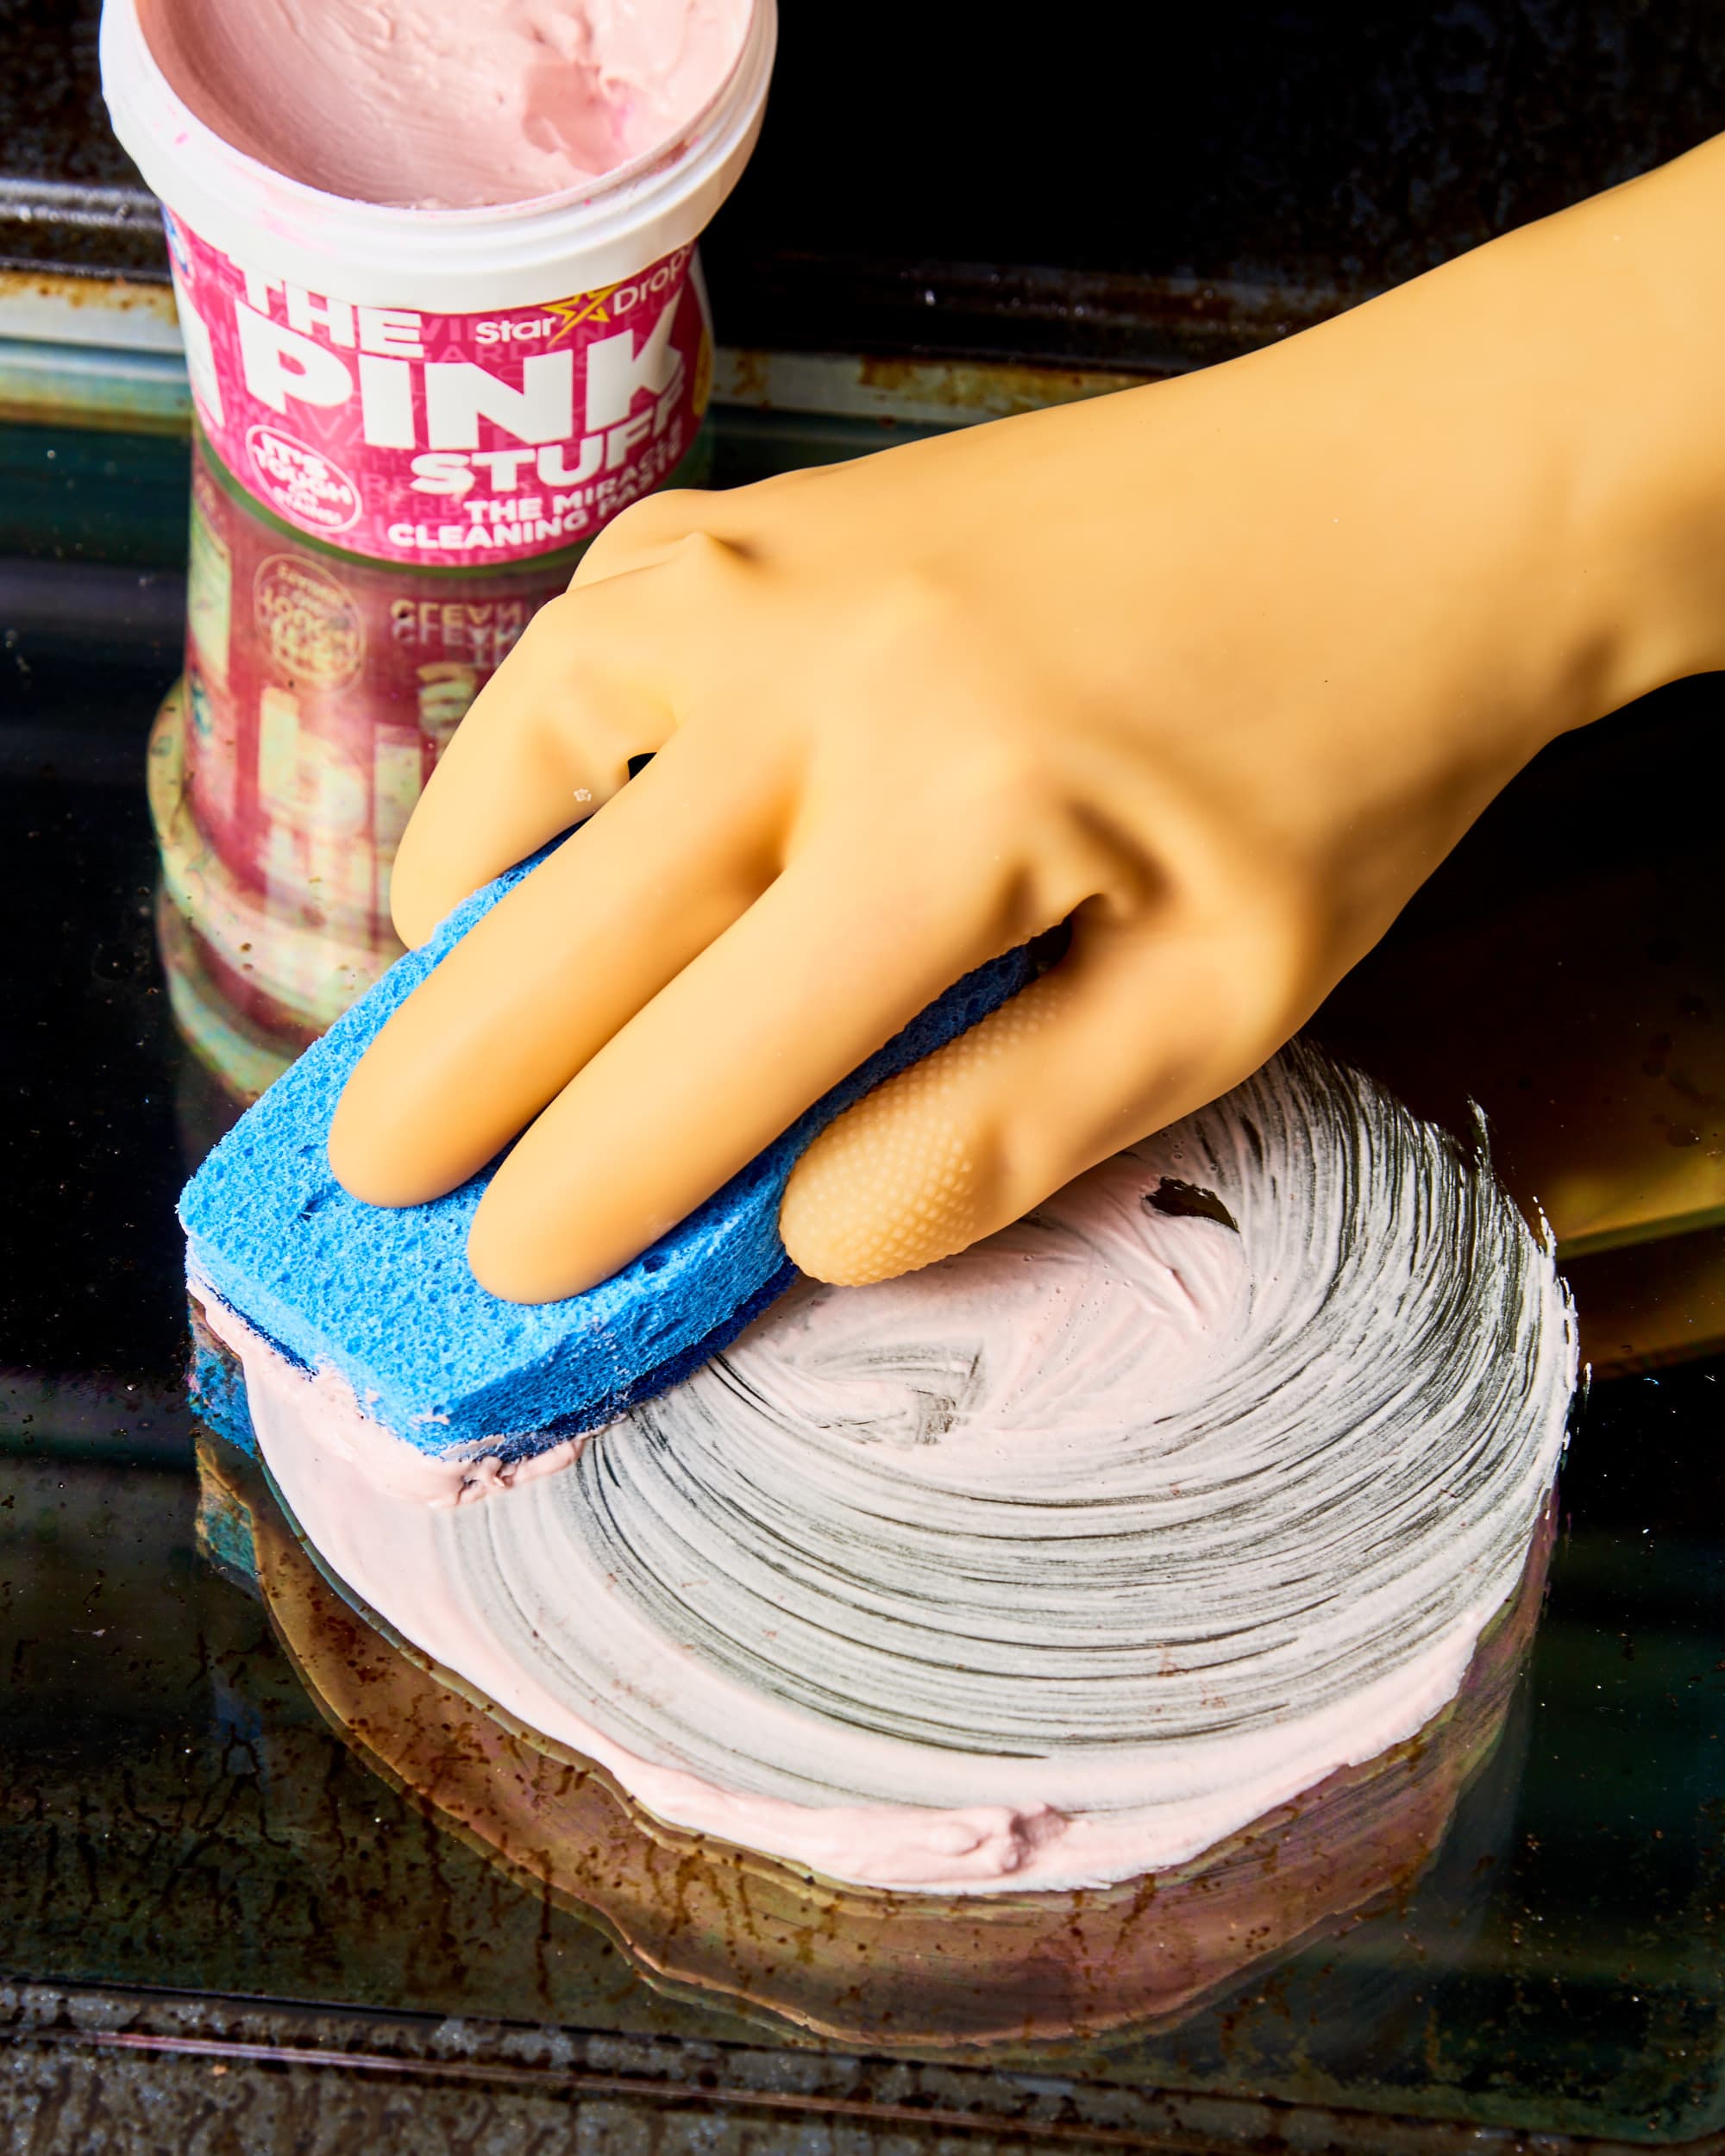 The pink stuff cleaner • Compare & see prices now »